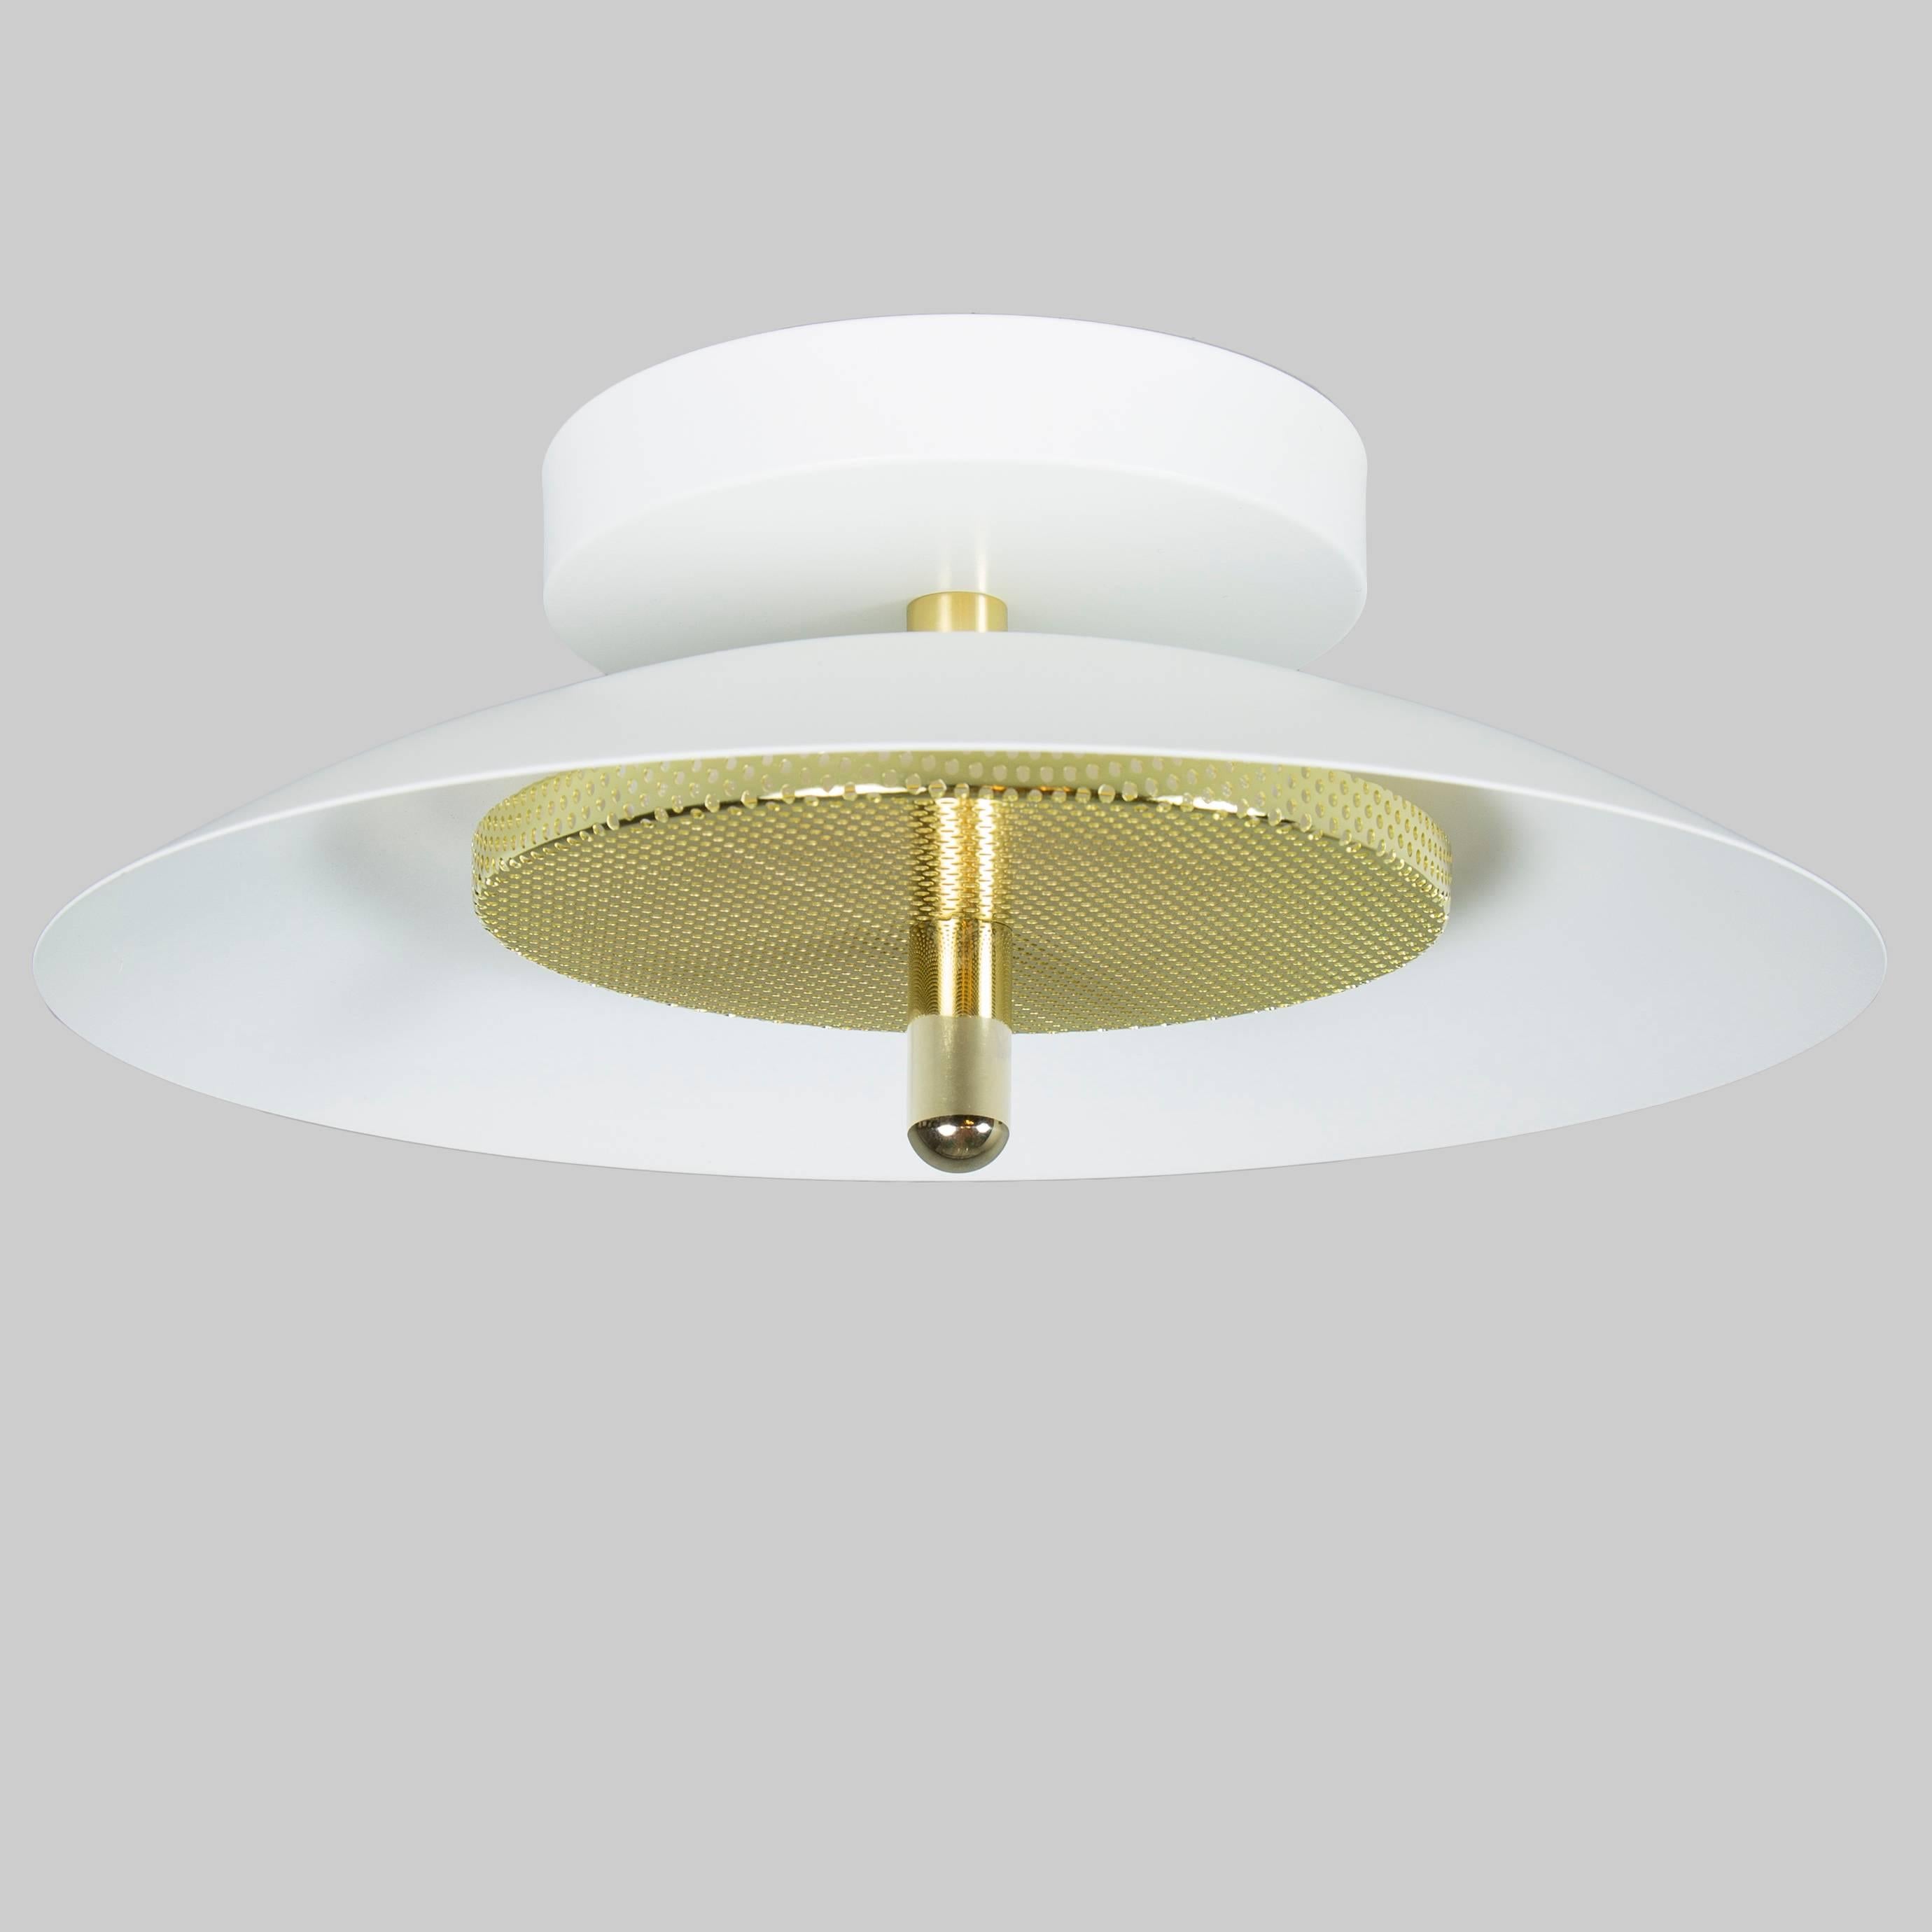 American Signal Flush Mount, White and Brass, from Souda, Made to Order For Sale